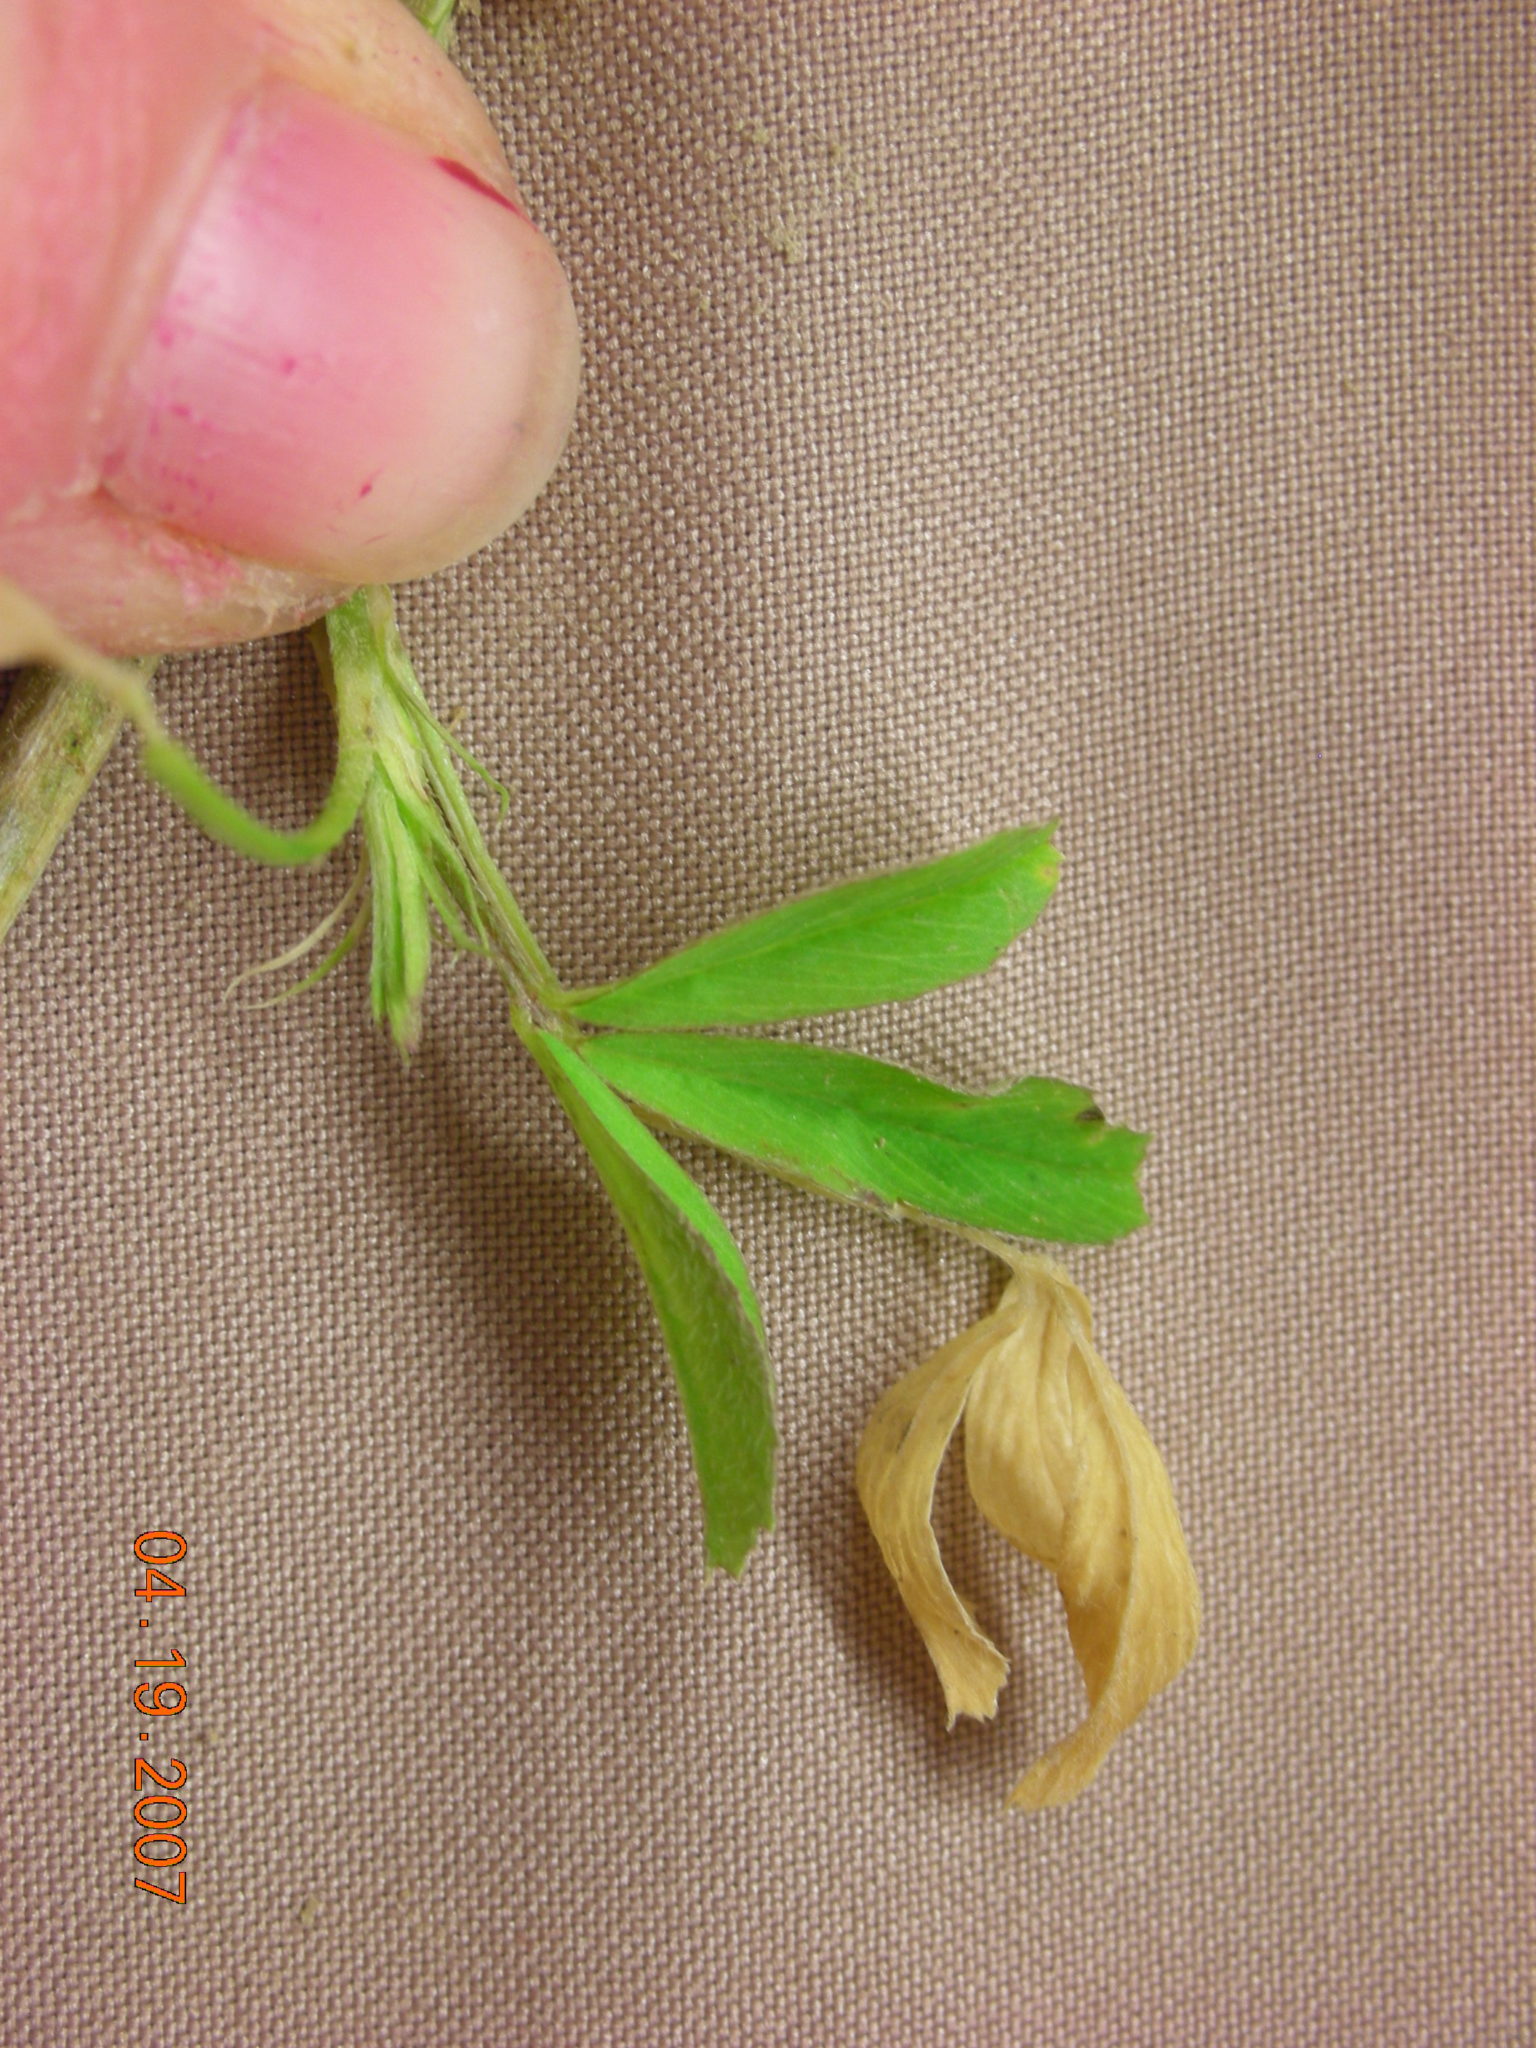 Alfalfa leaflets that emerge after a freeze will be bleached.